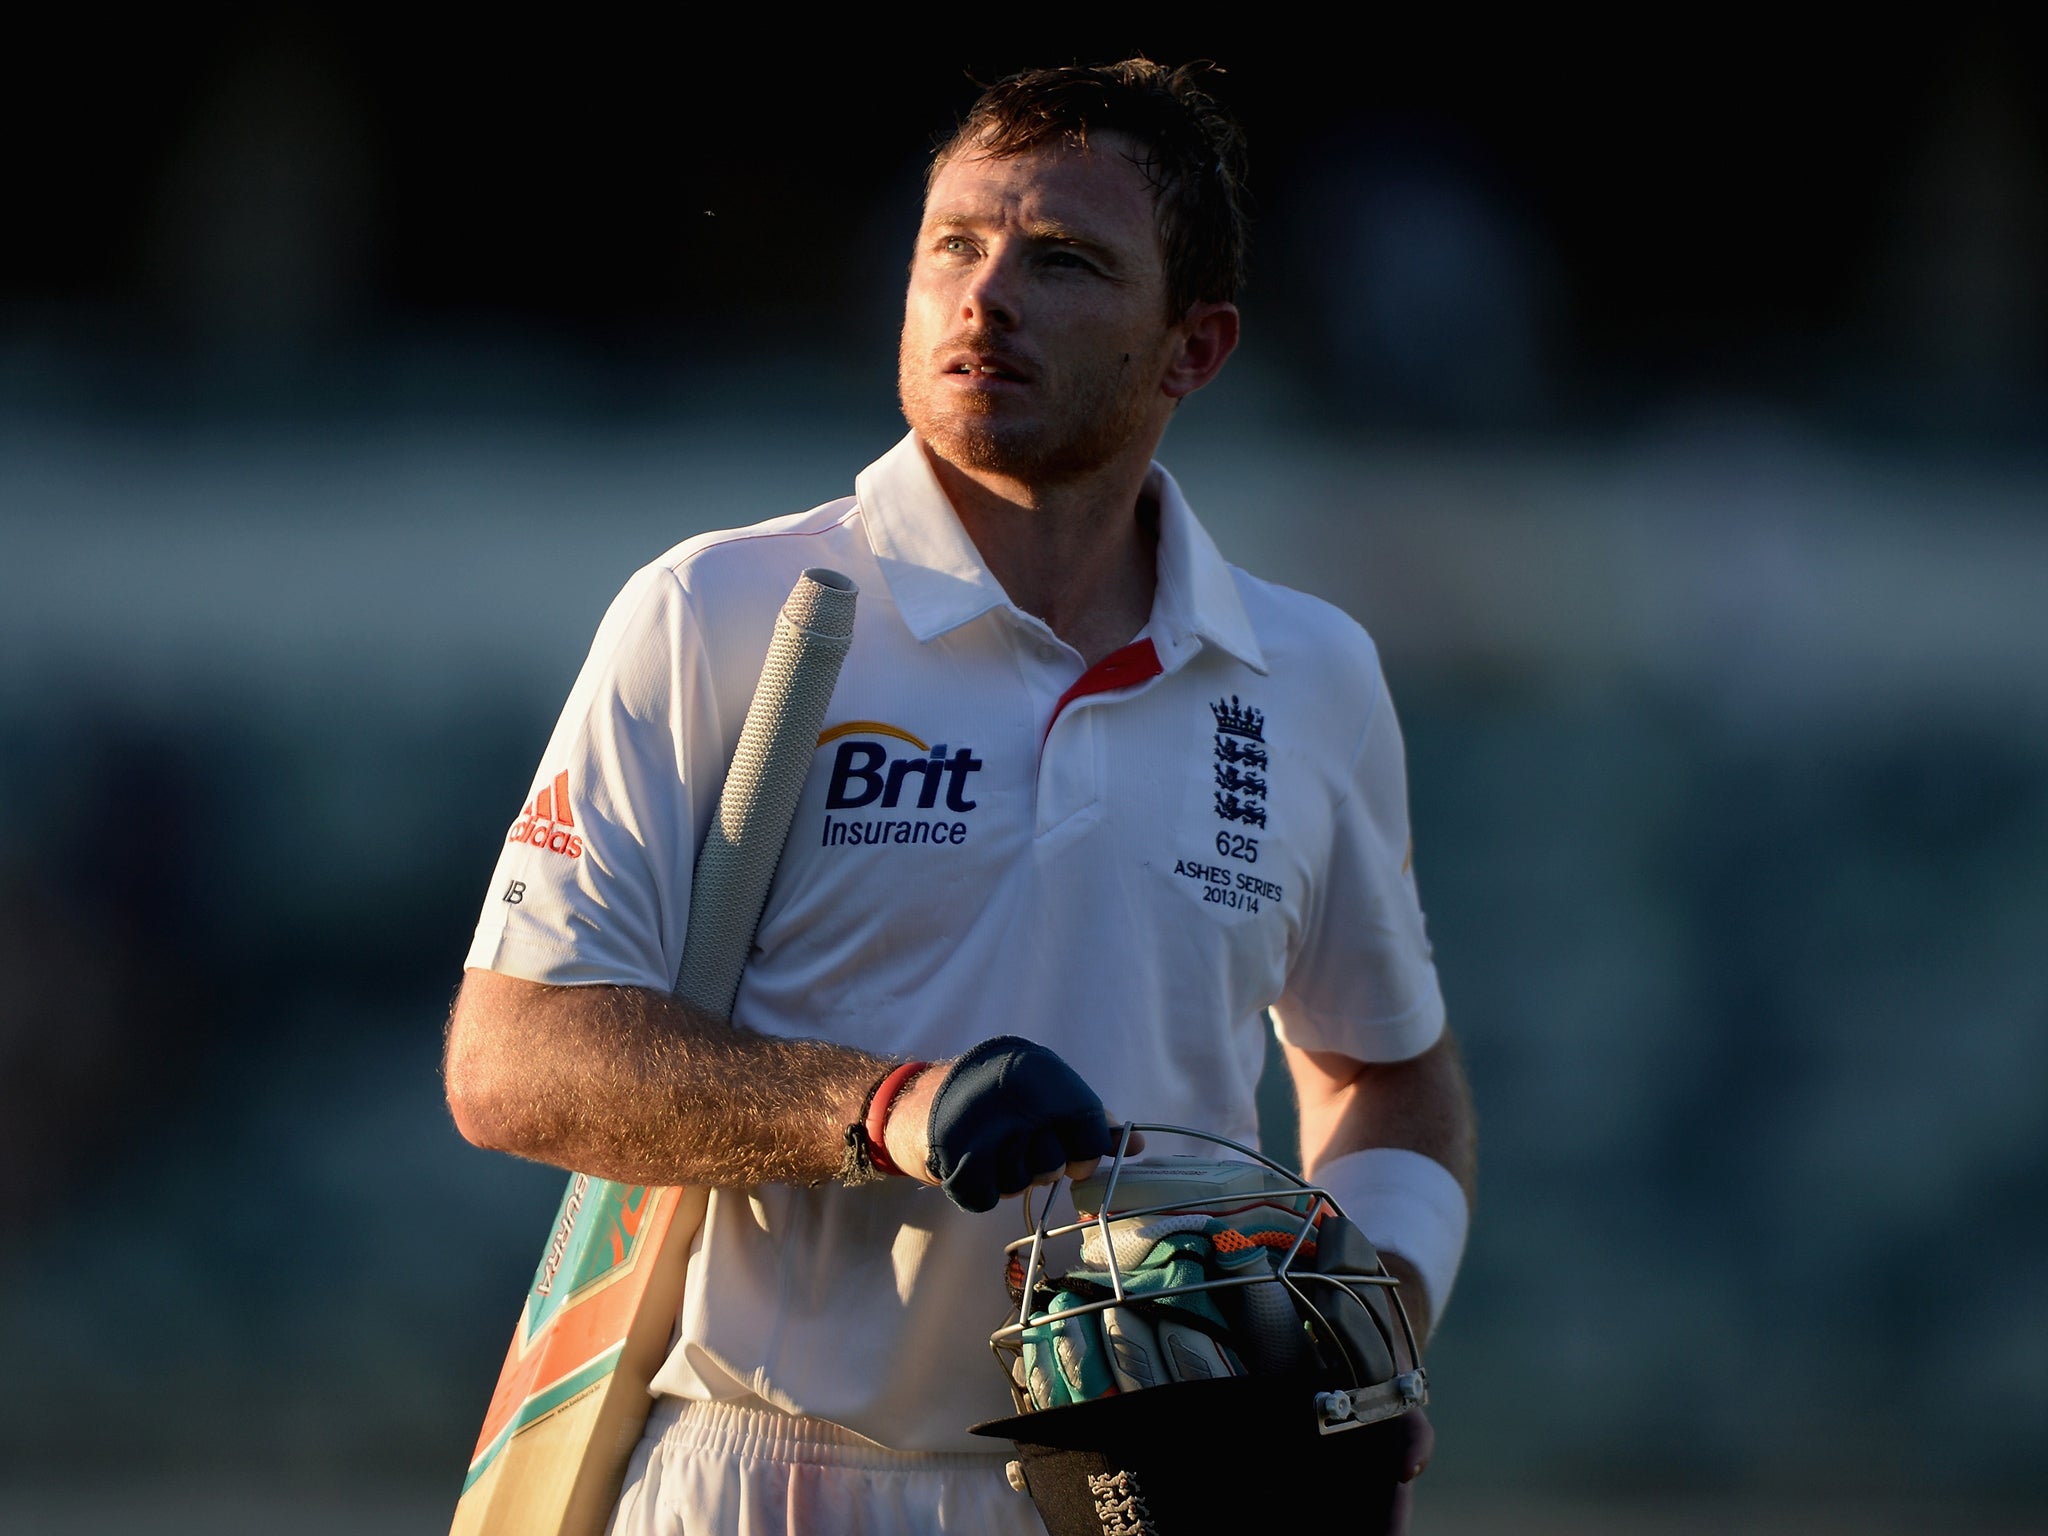 Ian Bell scored 77 not-out to help England recover to 270-2 at the end of Day Two of their match against the WACA Chairman's XI